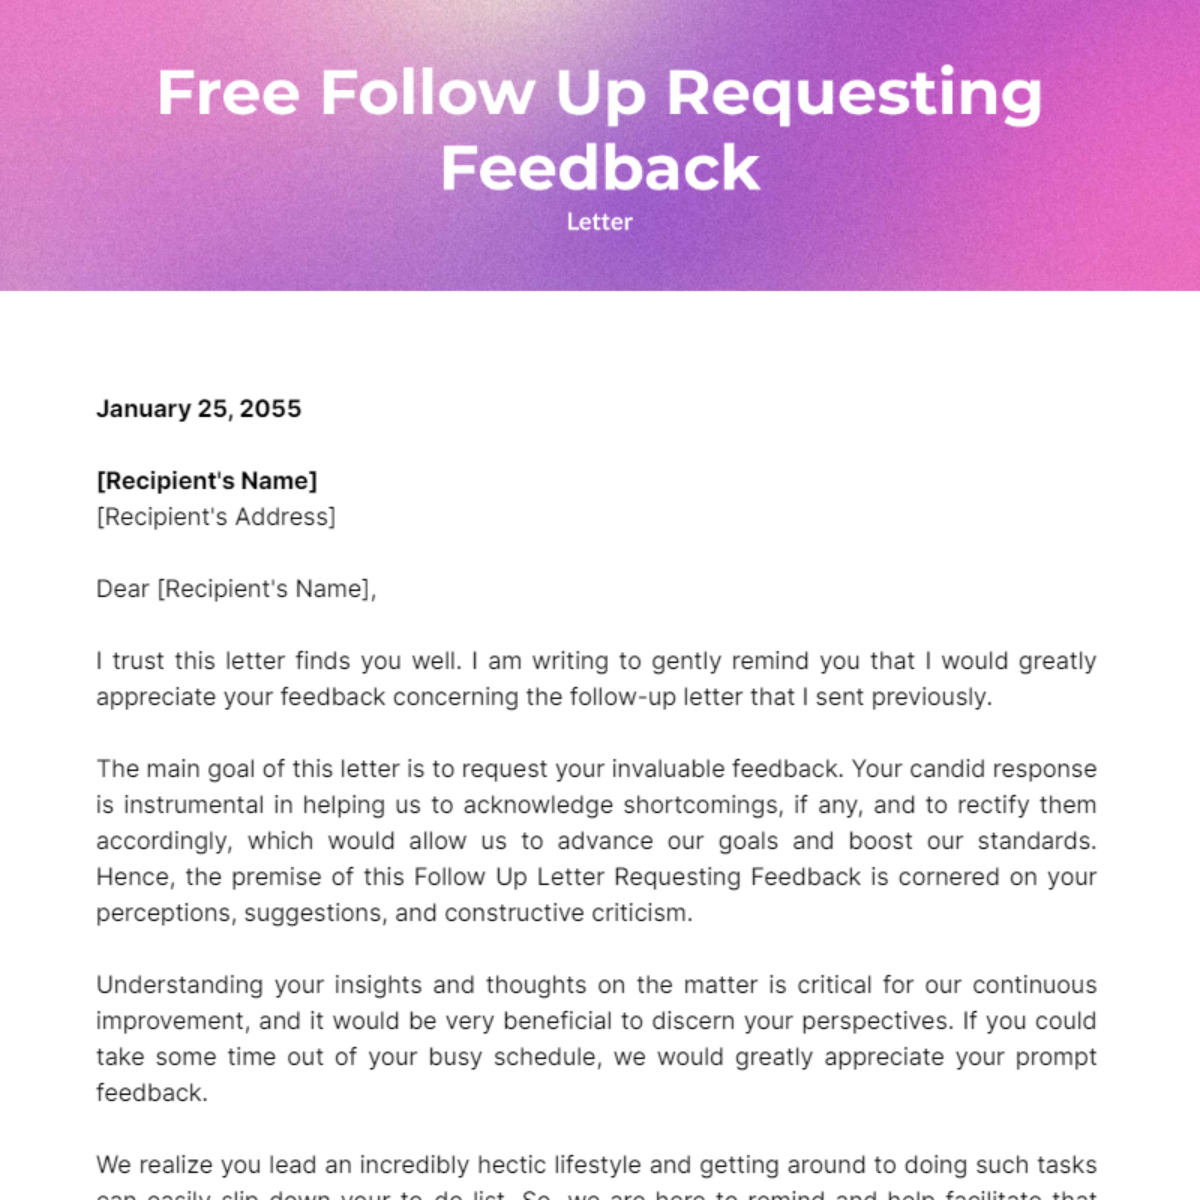 Follow Up Letter Requesting Feedback Template